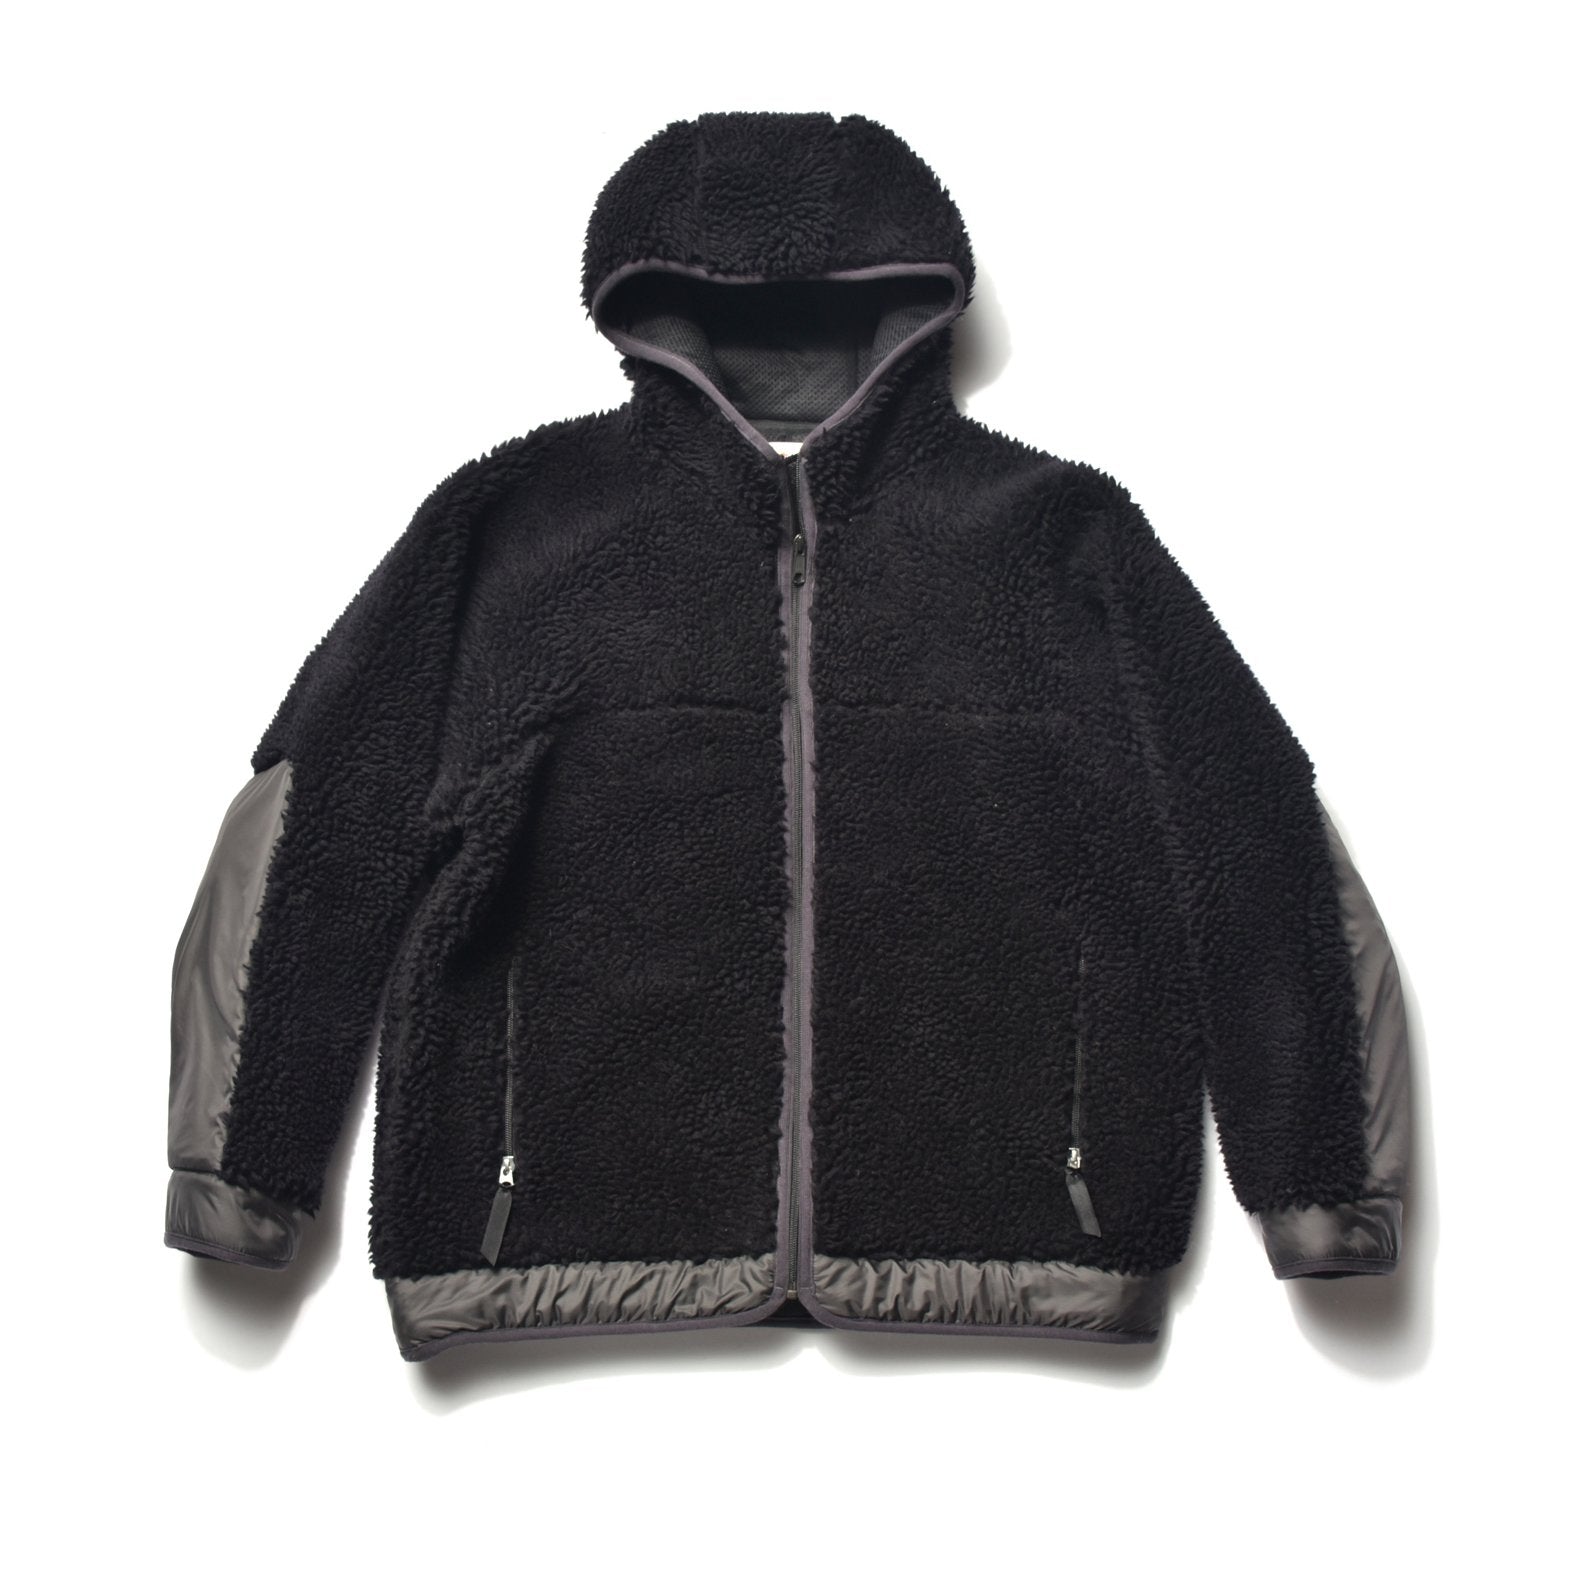 OUTDOOR WOOL PILE HOODED JACKET – The Real McCoy's